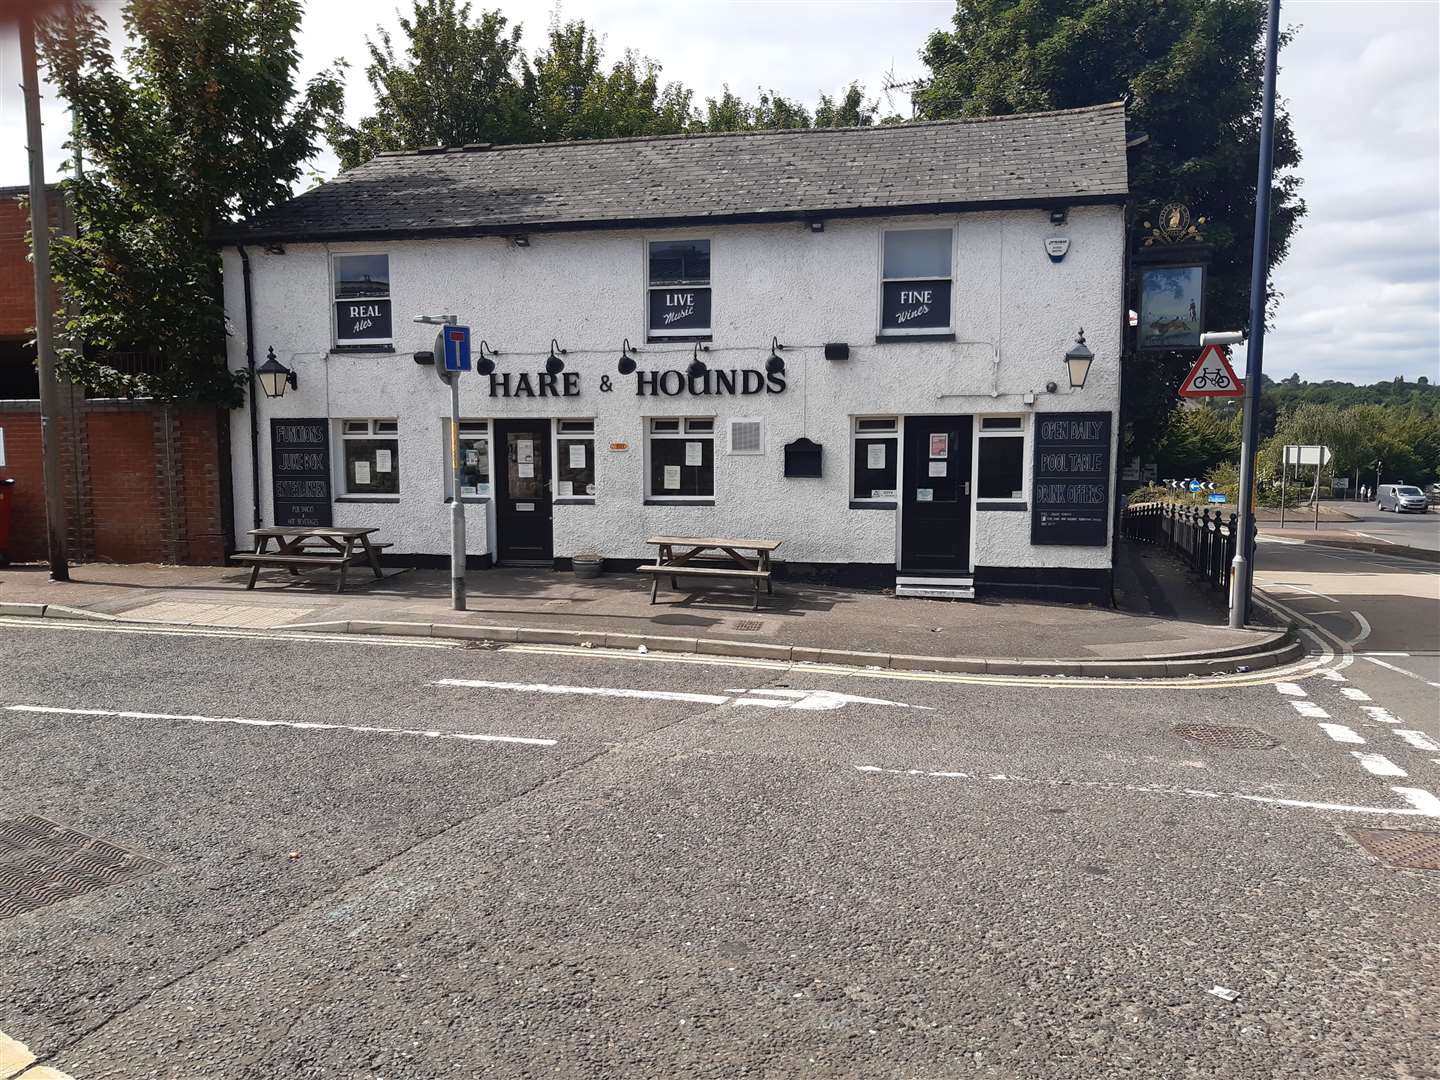 The assault happened outside the Hare and Hounds in Maidstone